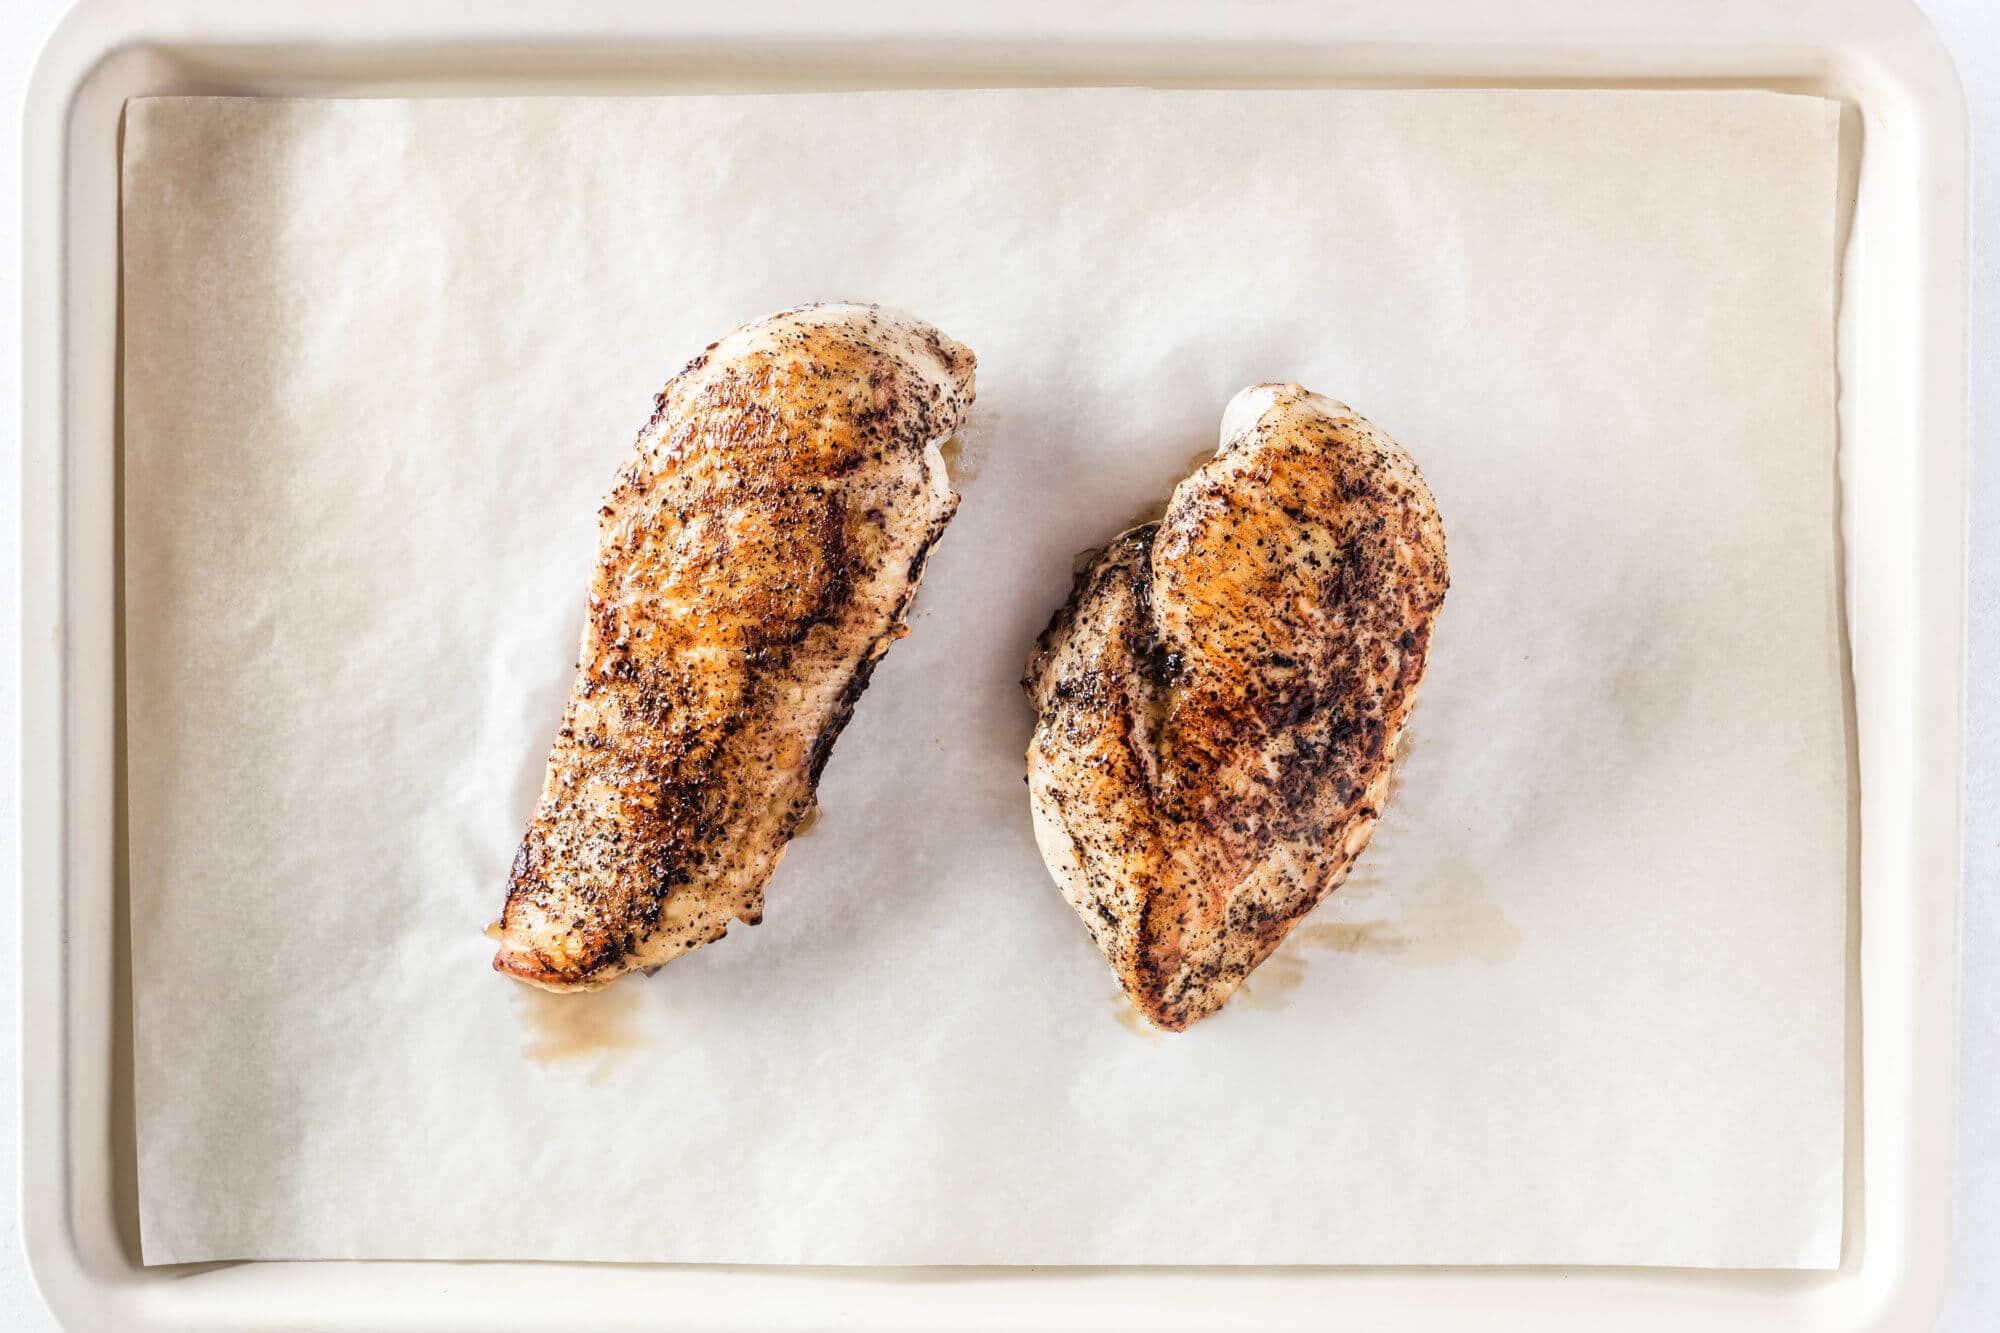 Two cooked chicken breasts on a baking tray with parchment paper.